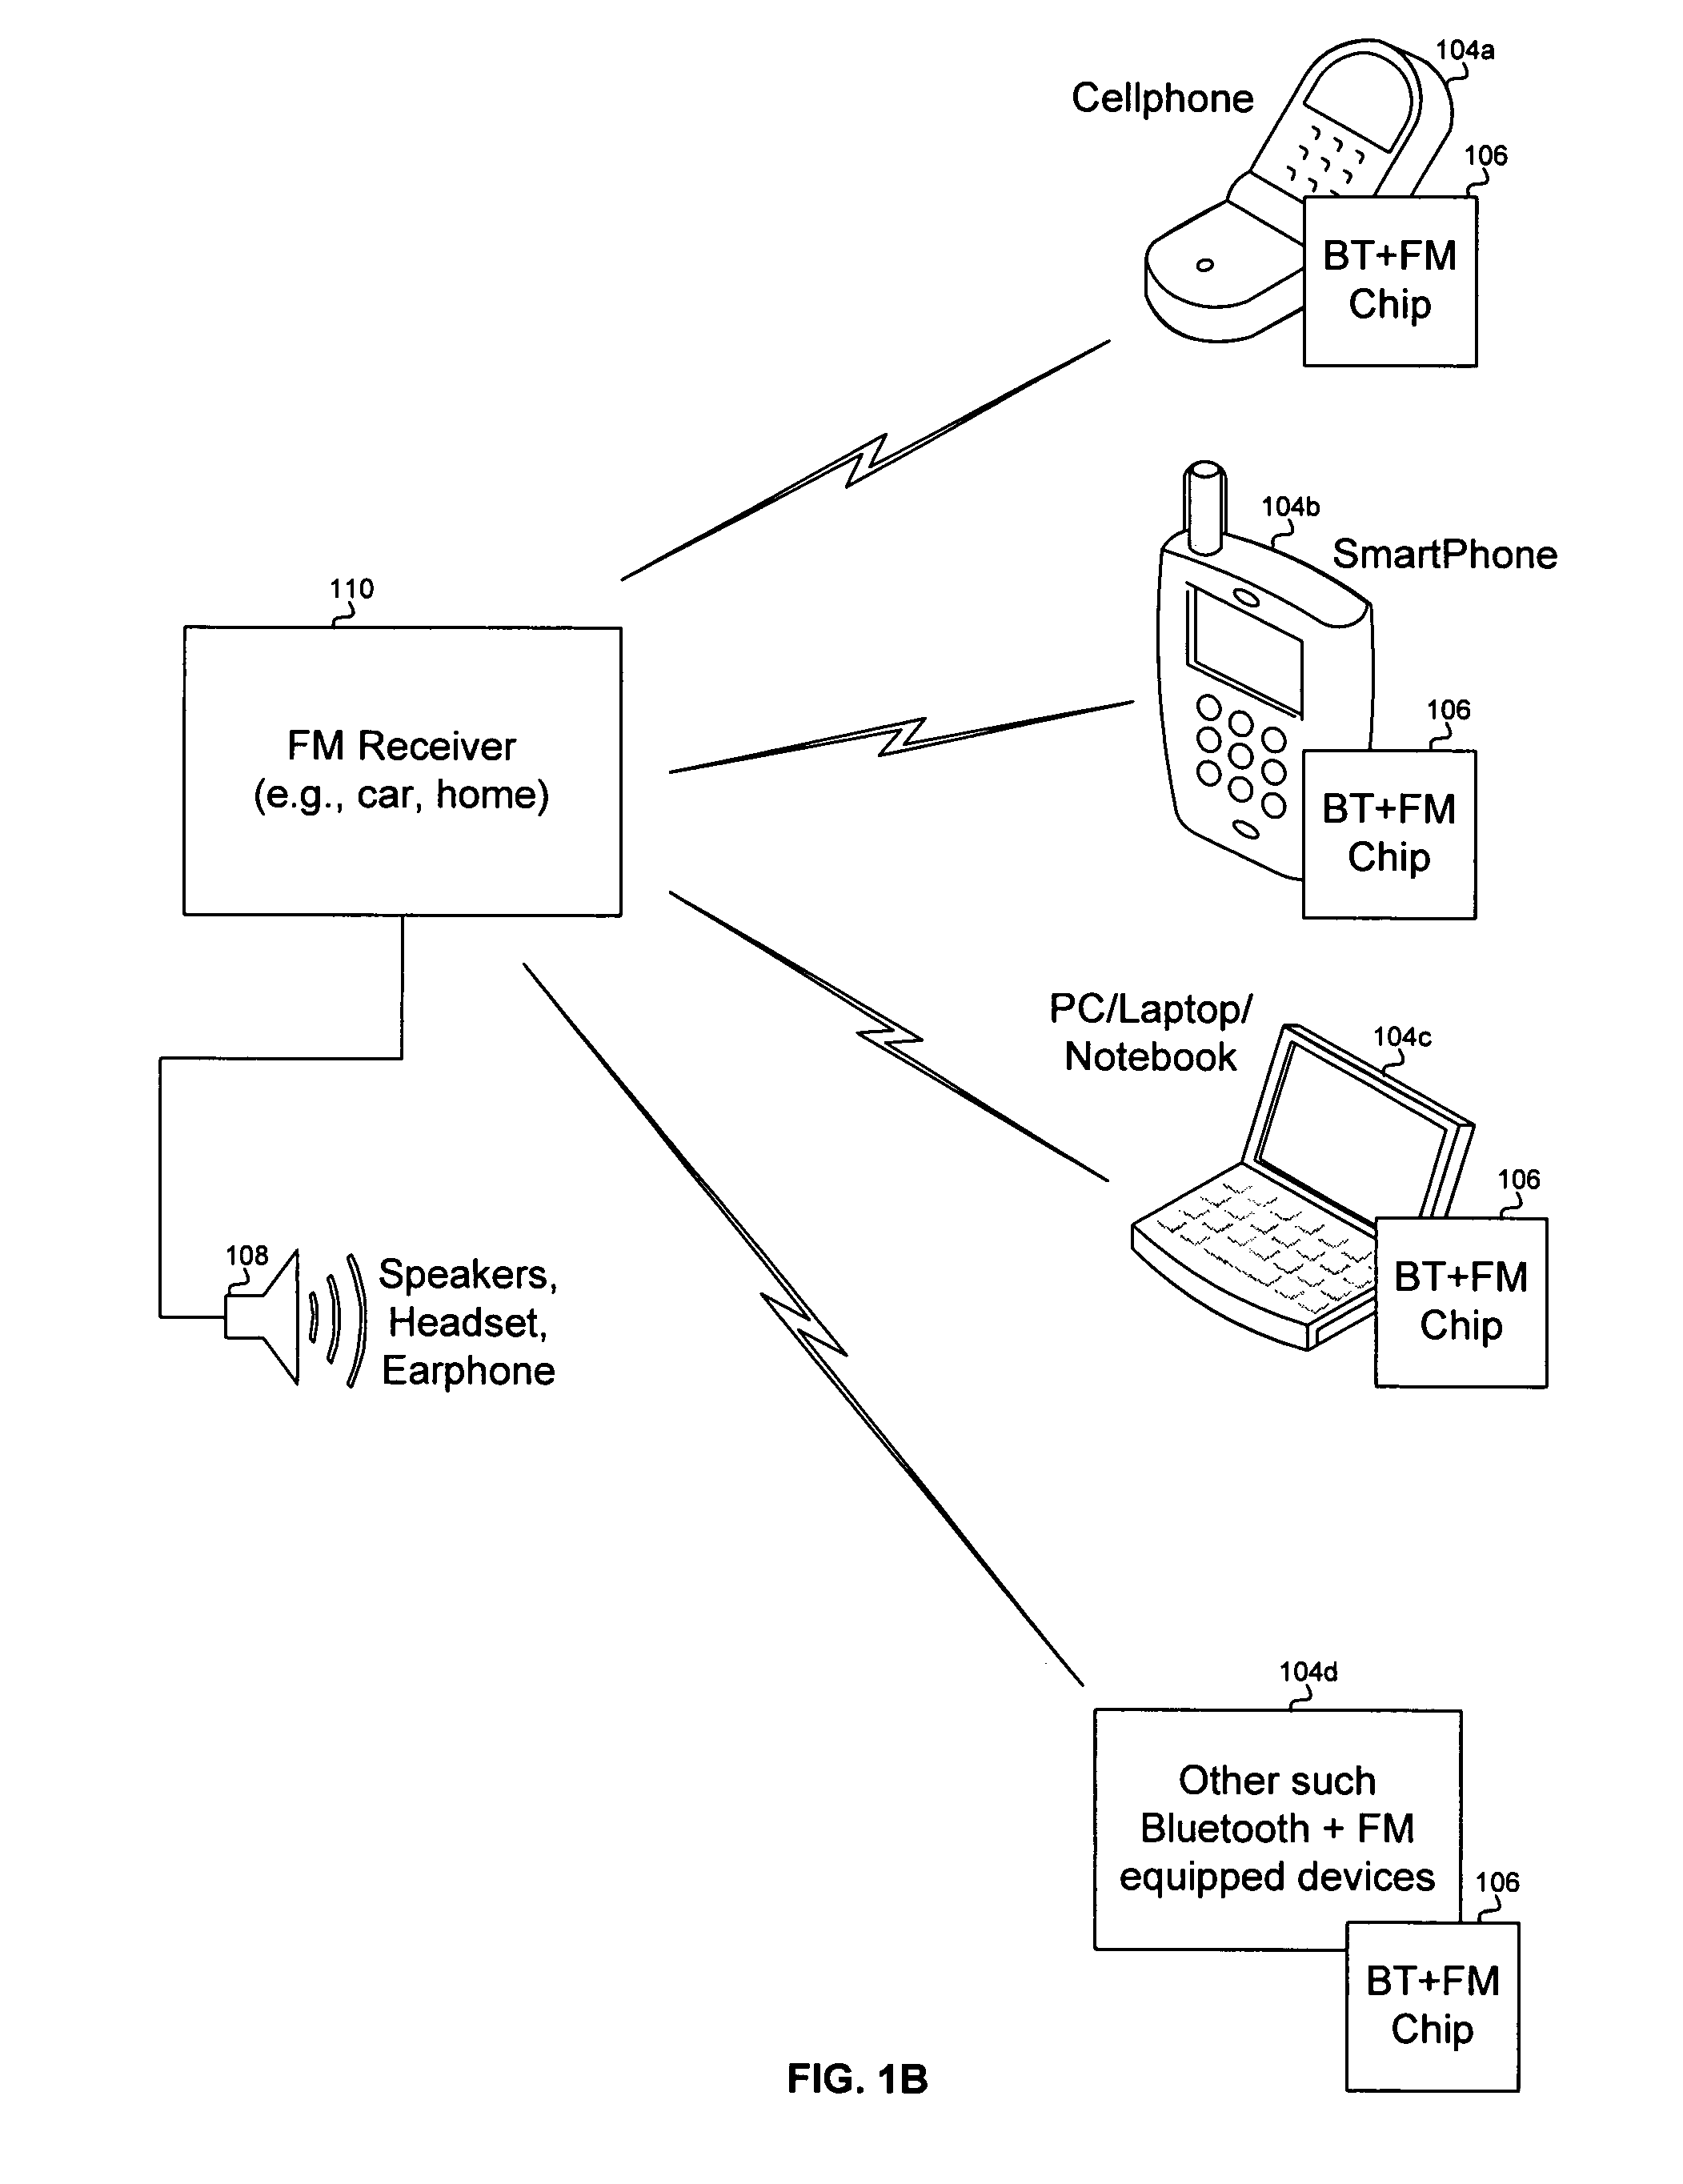 Method and system for a radio data system (RDS) demodulator for a single chip integrated bluetooth and frequency modulation (FM) transceiver and baseband processor